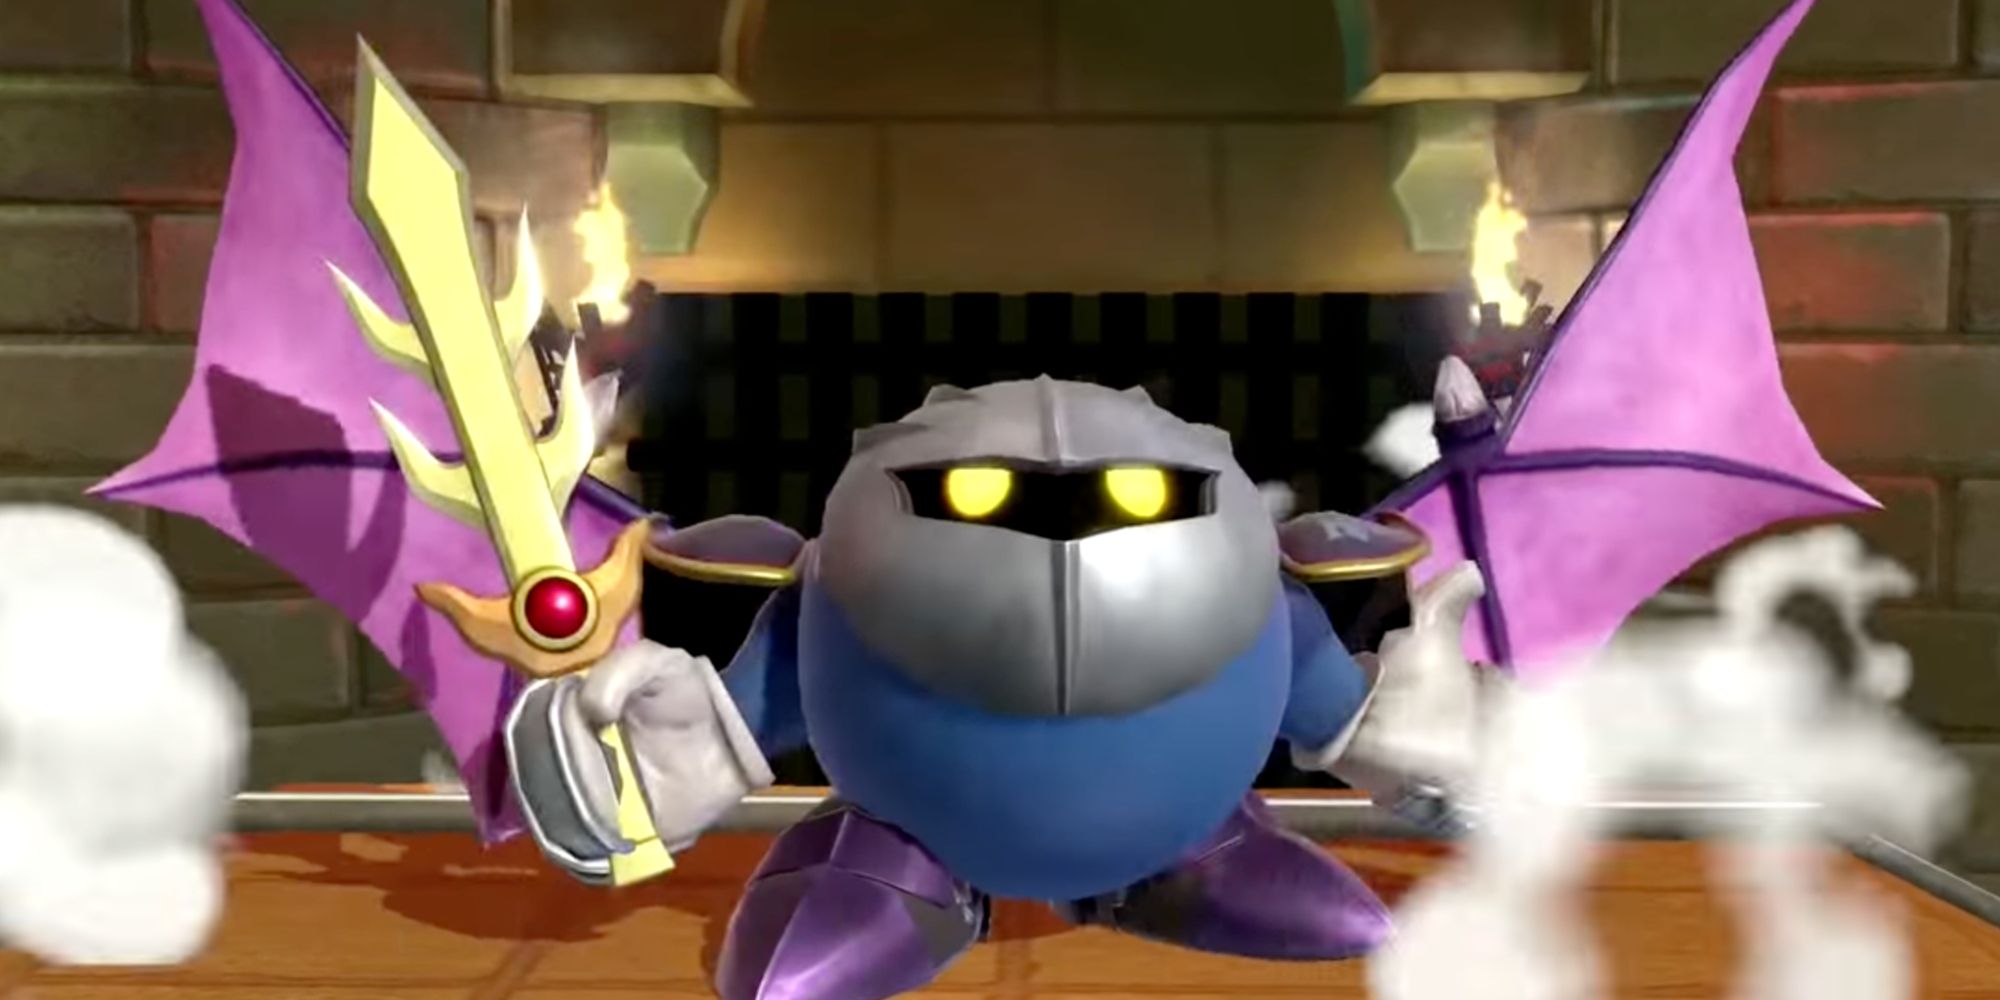 Meta Knight from the Kirby Series and Super Smash Brothers Ultimate